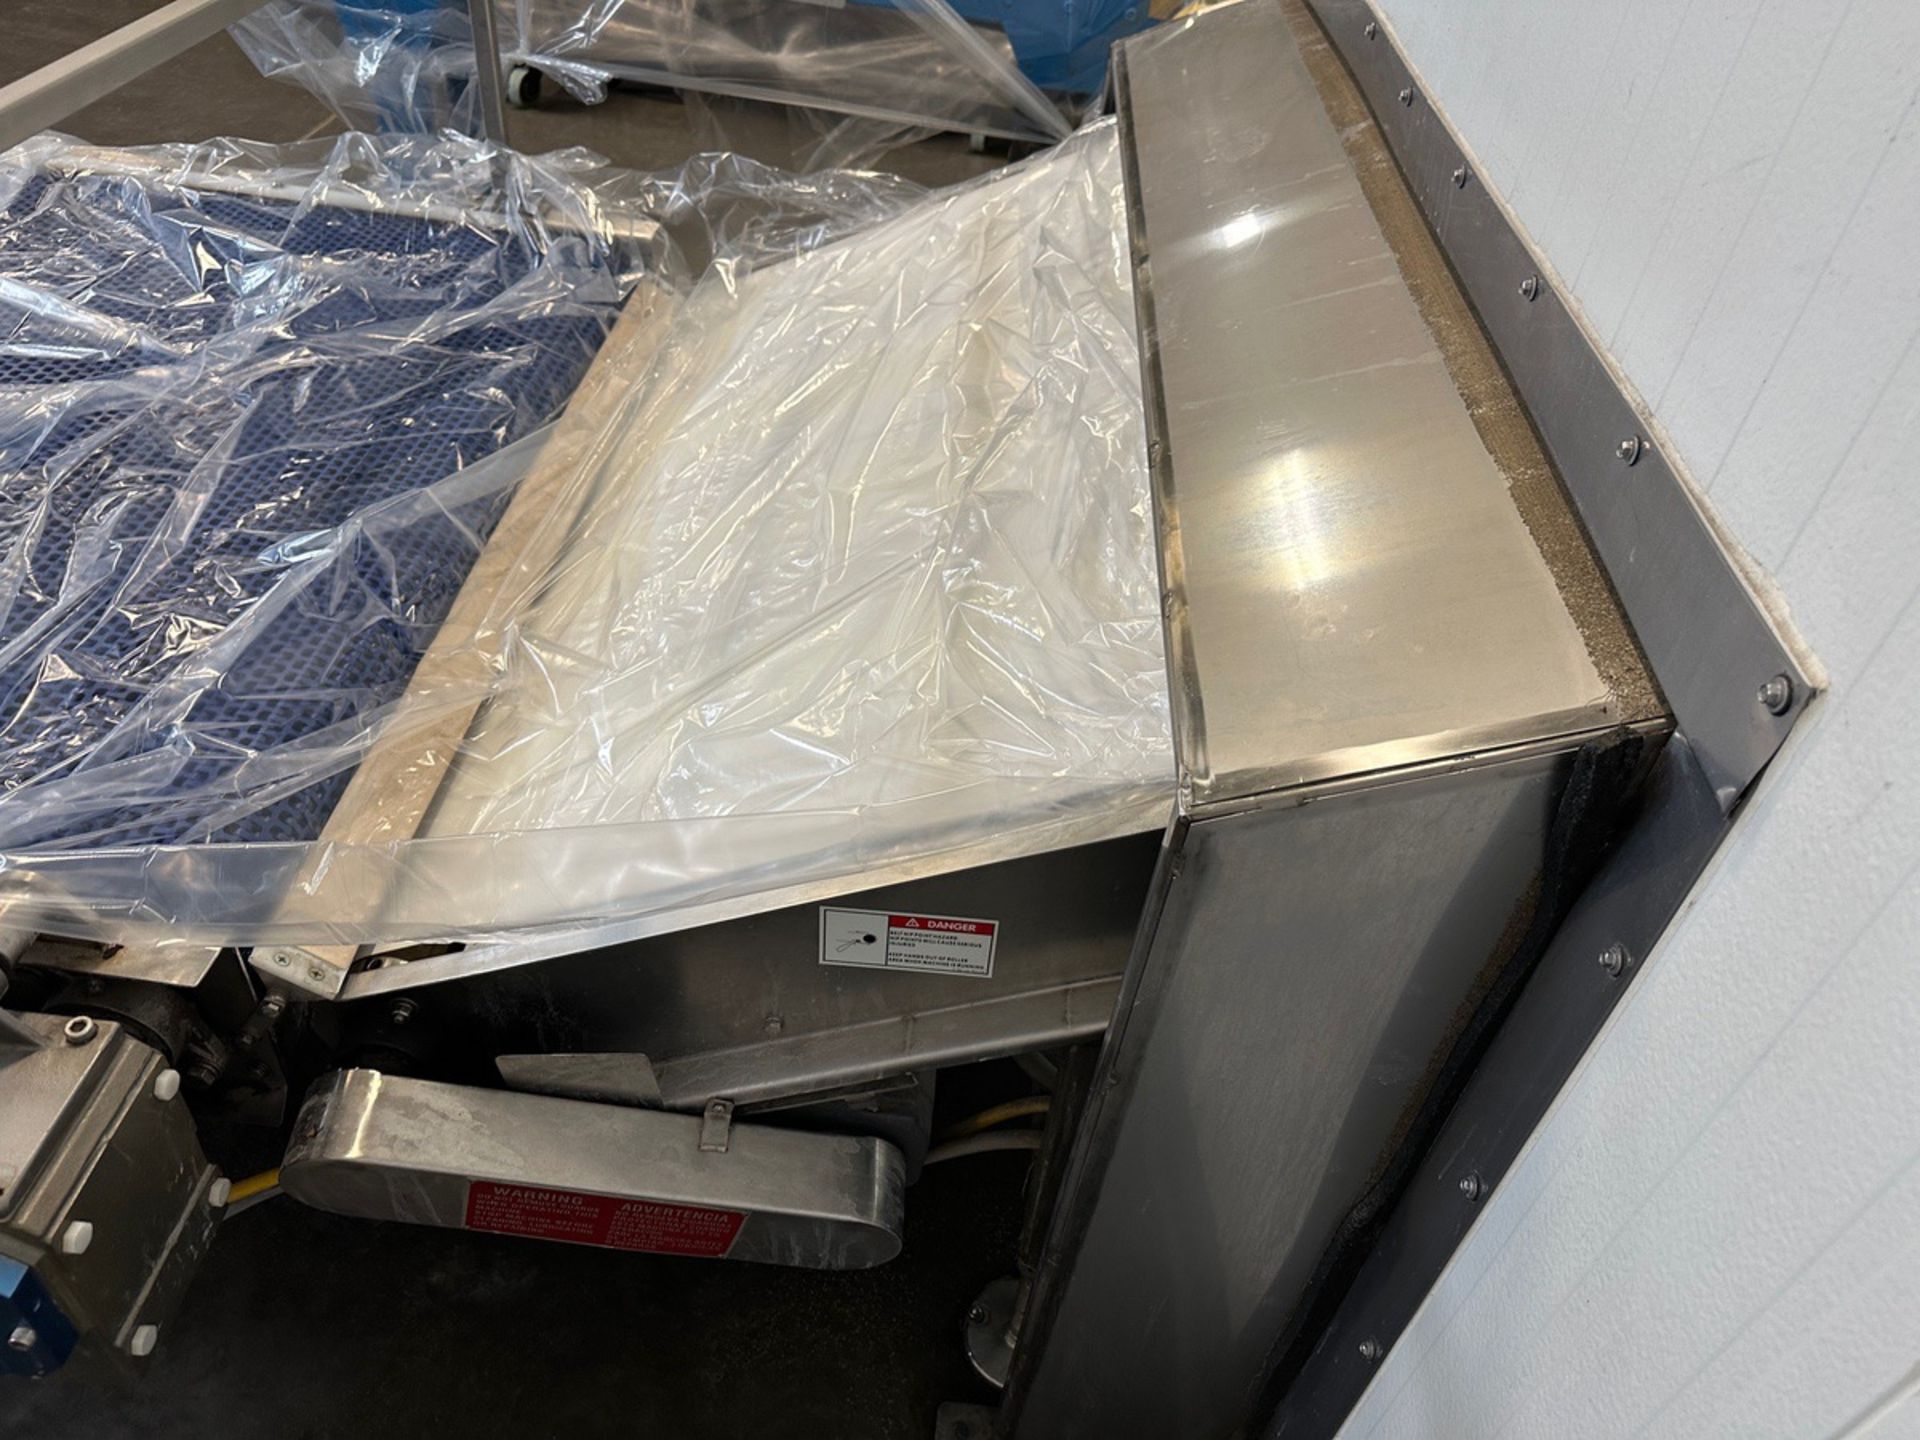 2019 AM Manufacturing Incline Belt Conveyor (Approx. 48" x 10') | Rig Fee $250 - Image 2 of 3